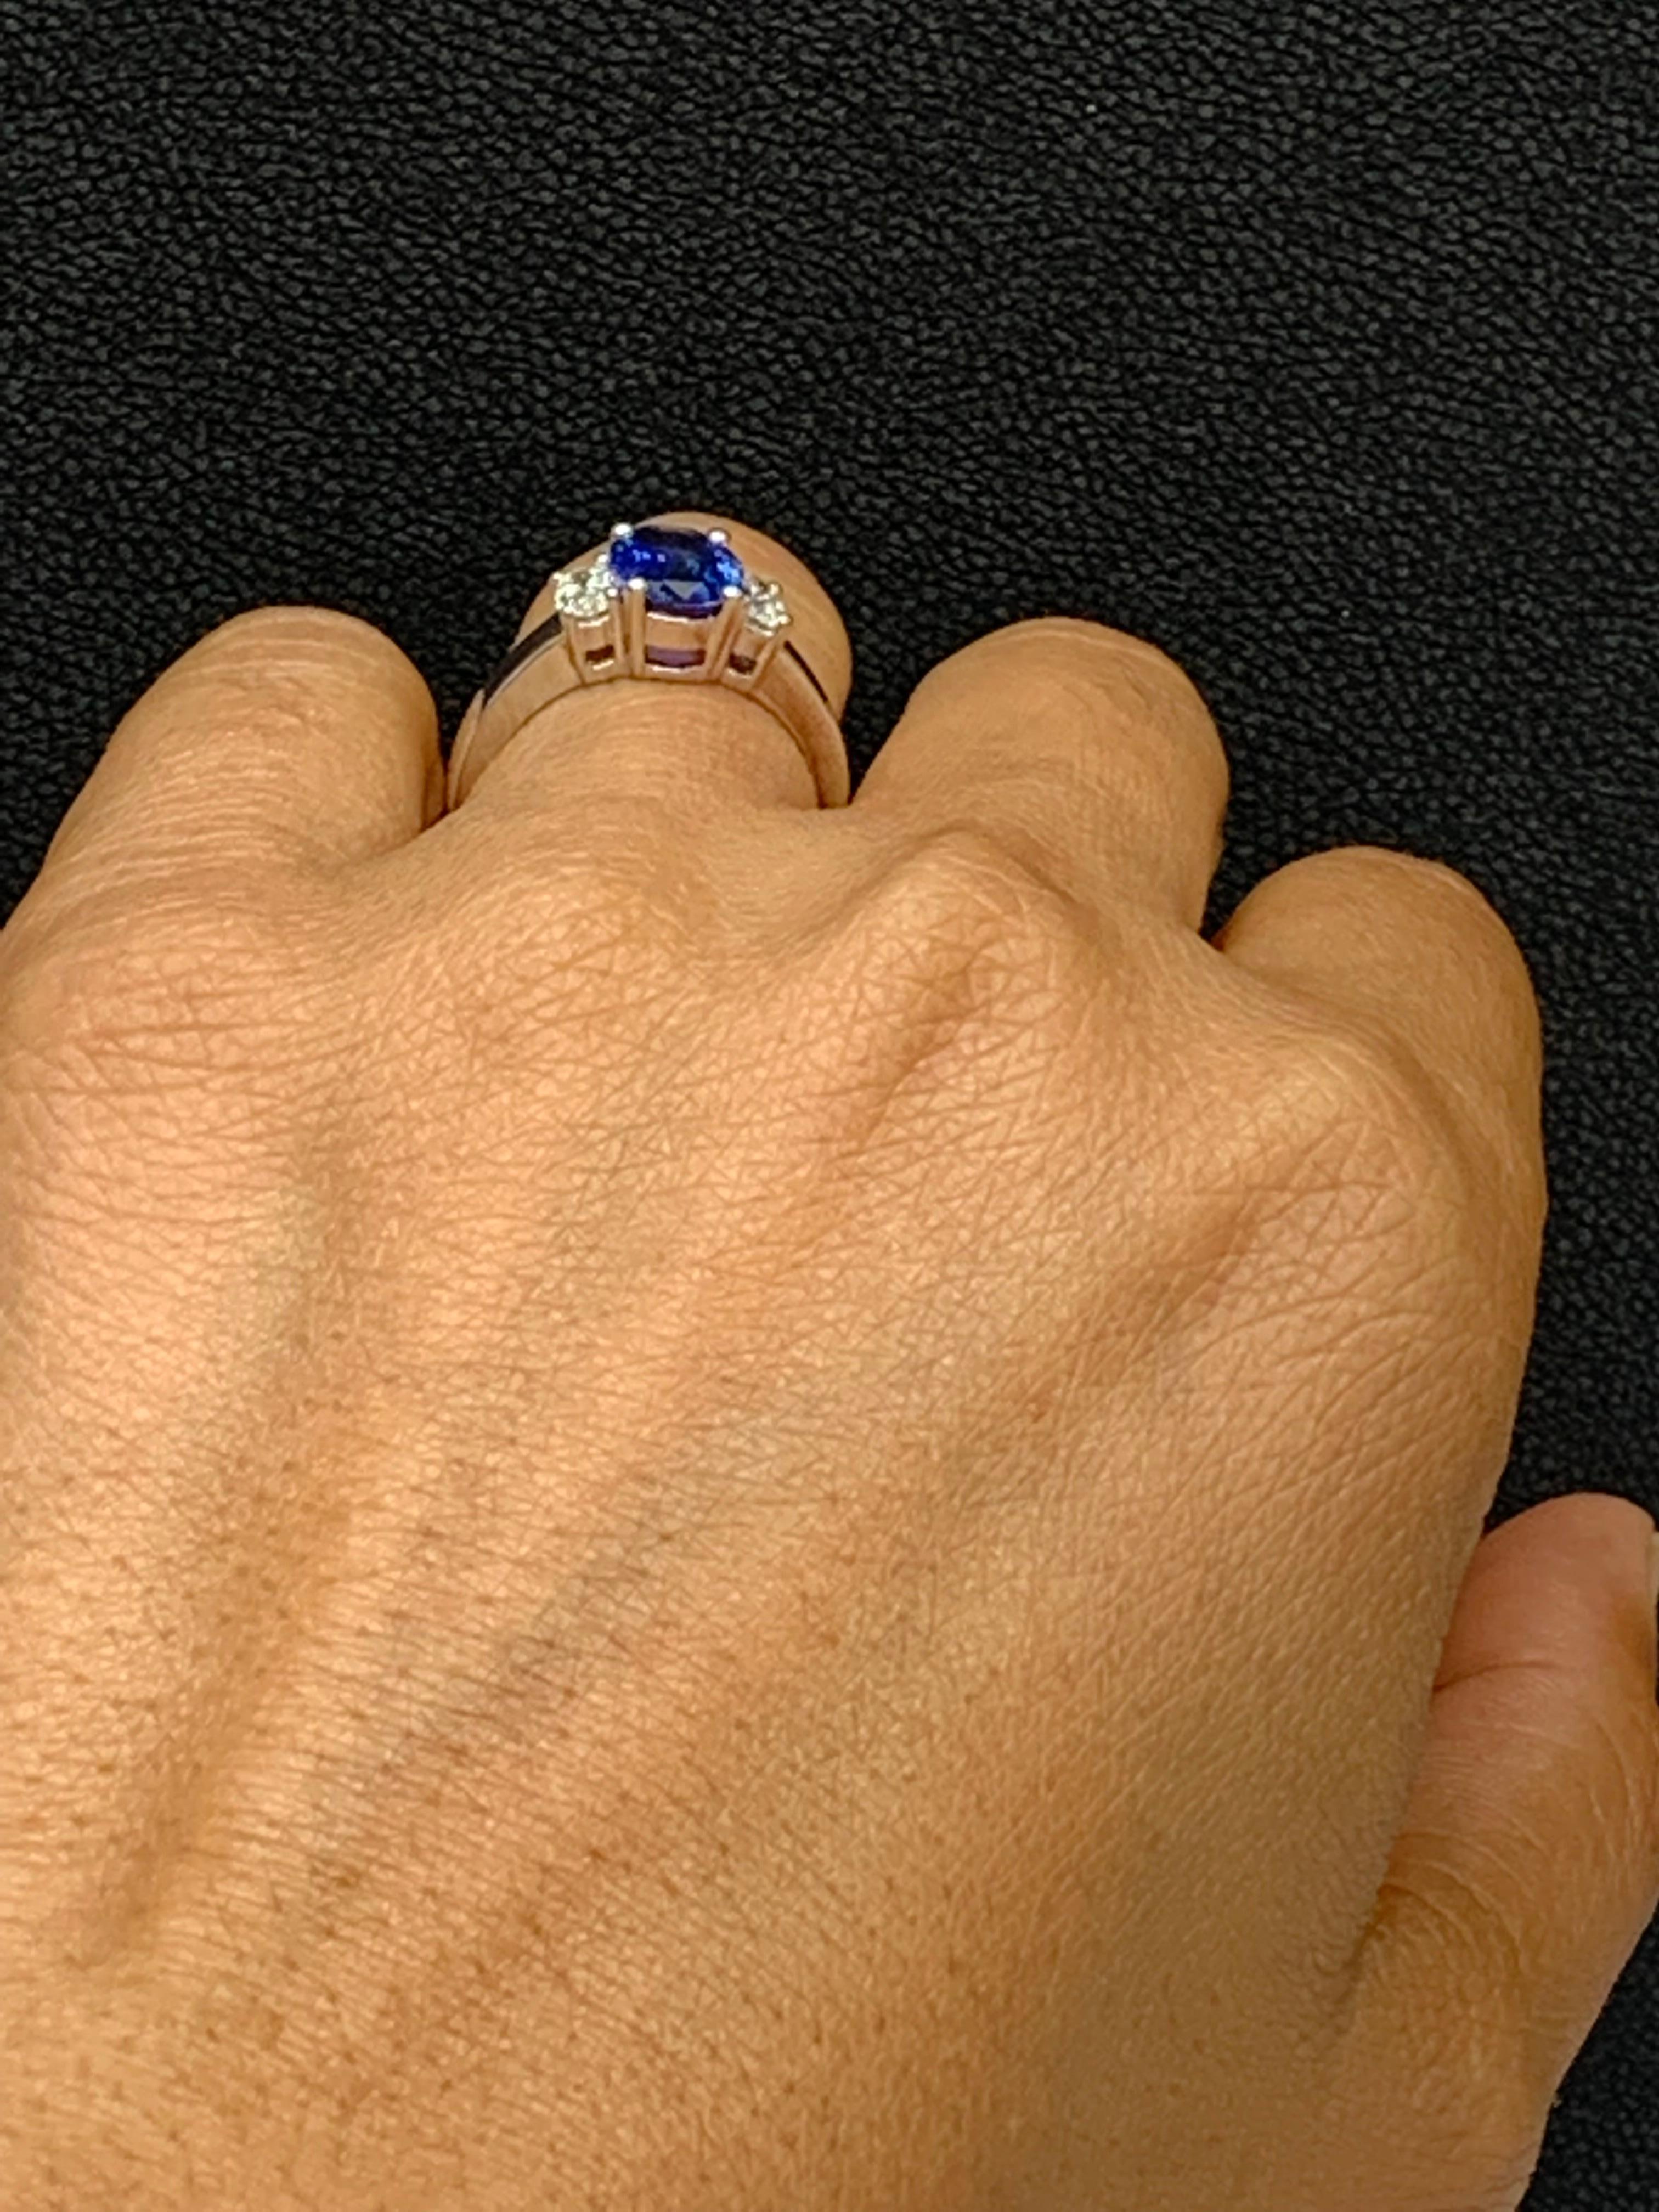 Showcases an Oval cut, Vibrant color blue sapphire weighing 2.12 carats, flanked by two brilliant oval cut diamonds weighing 0.48 carats. Elegantly set in 18k White Gold.